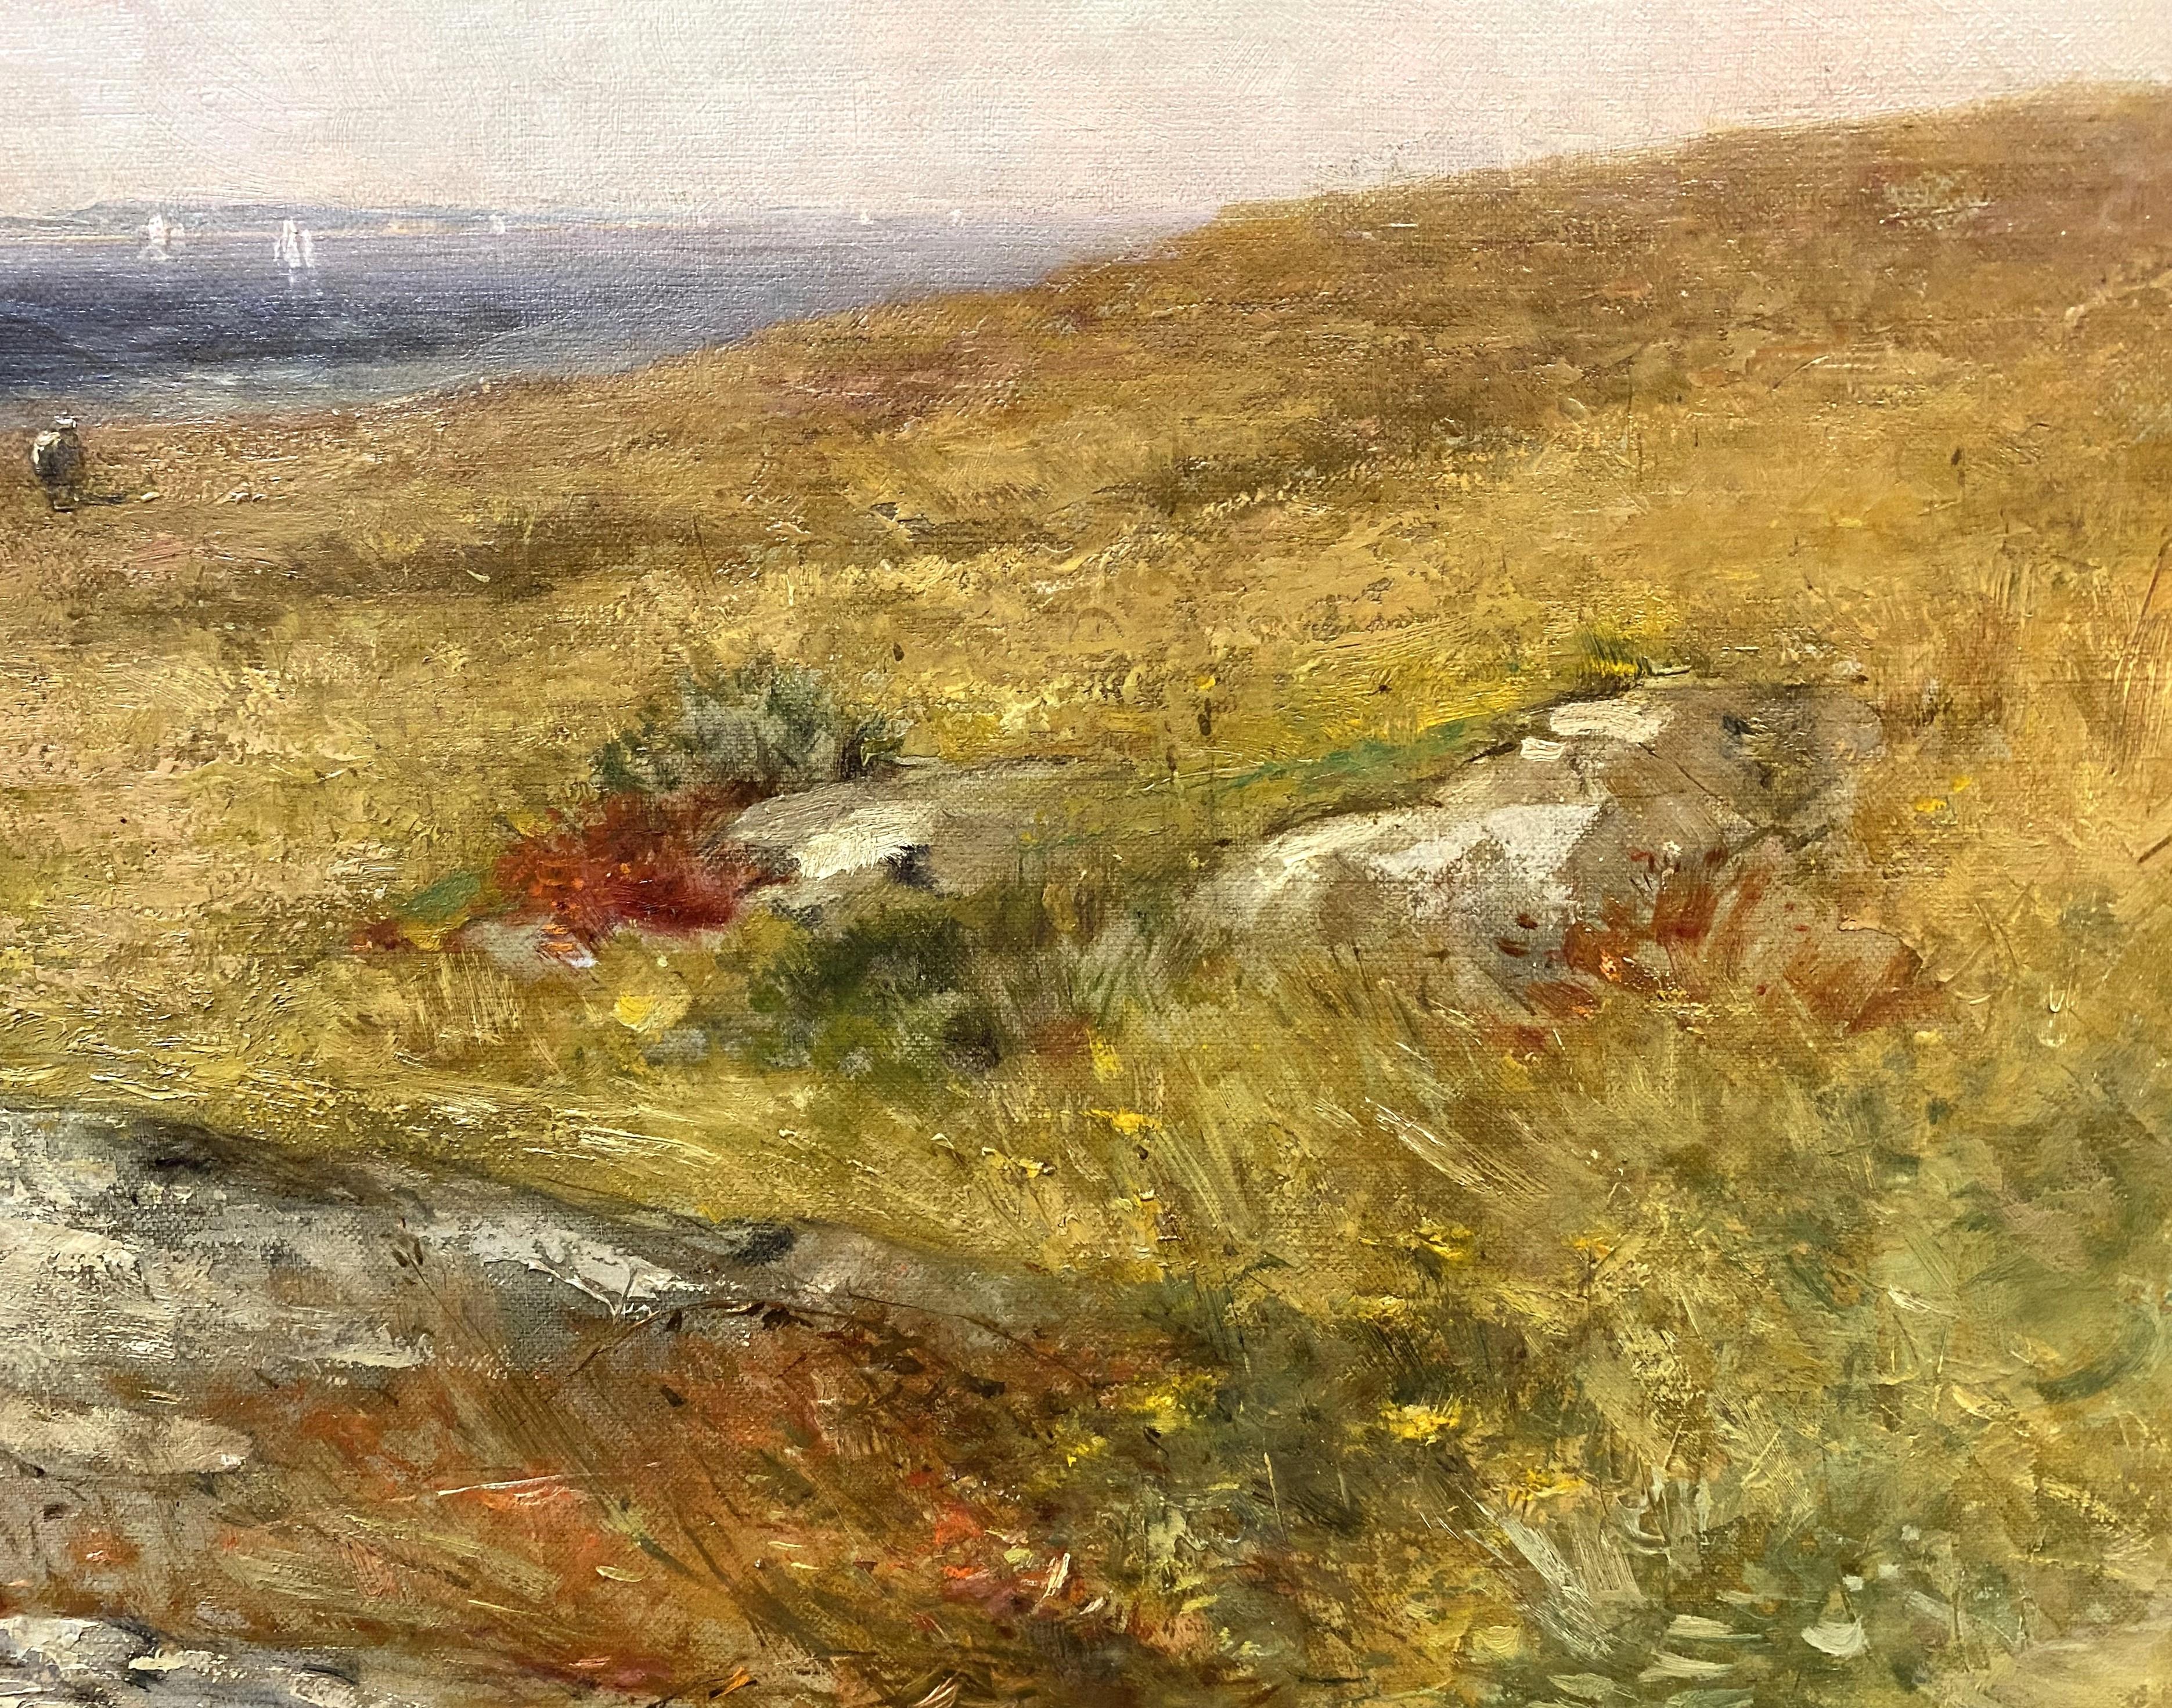 A fine New England landscape with sheep grazing near Boston’s North Shore coast by American artist George Henry Smillie (1840-1921). Smillie was born in New York, son of engraver James Smillie,  and studied with artist James McDougal Hart, becoming